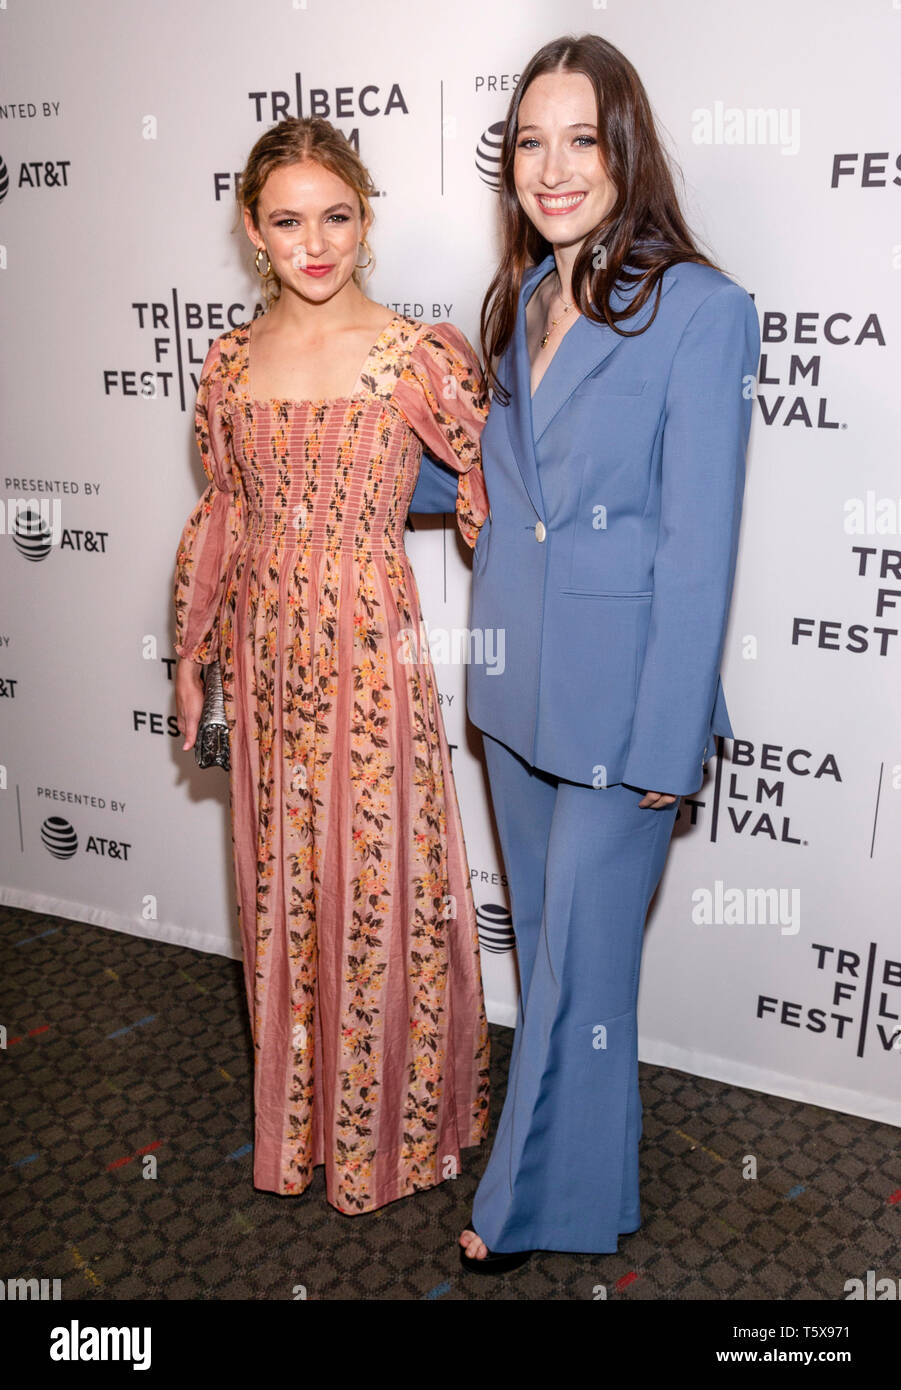 New York, NY - April 26, 2019: Morgan Saylor and Sophie Lowe attend the 'Blow The Man Down' screening during the 2019 Tribeca Film Festival at SVA The Stock Photo